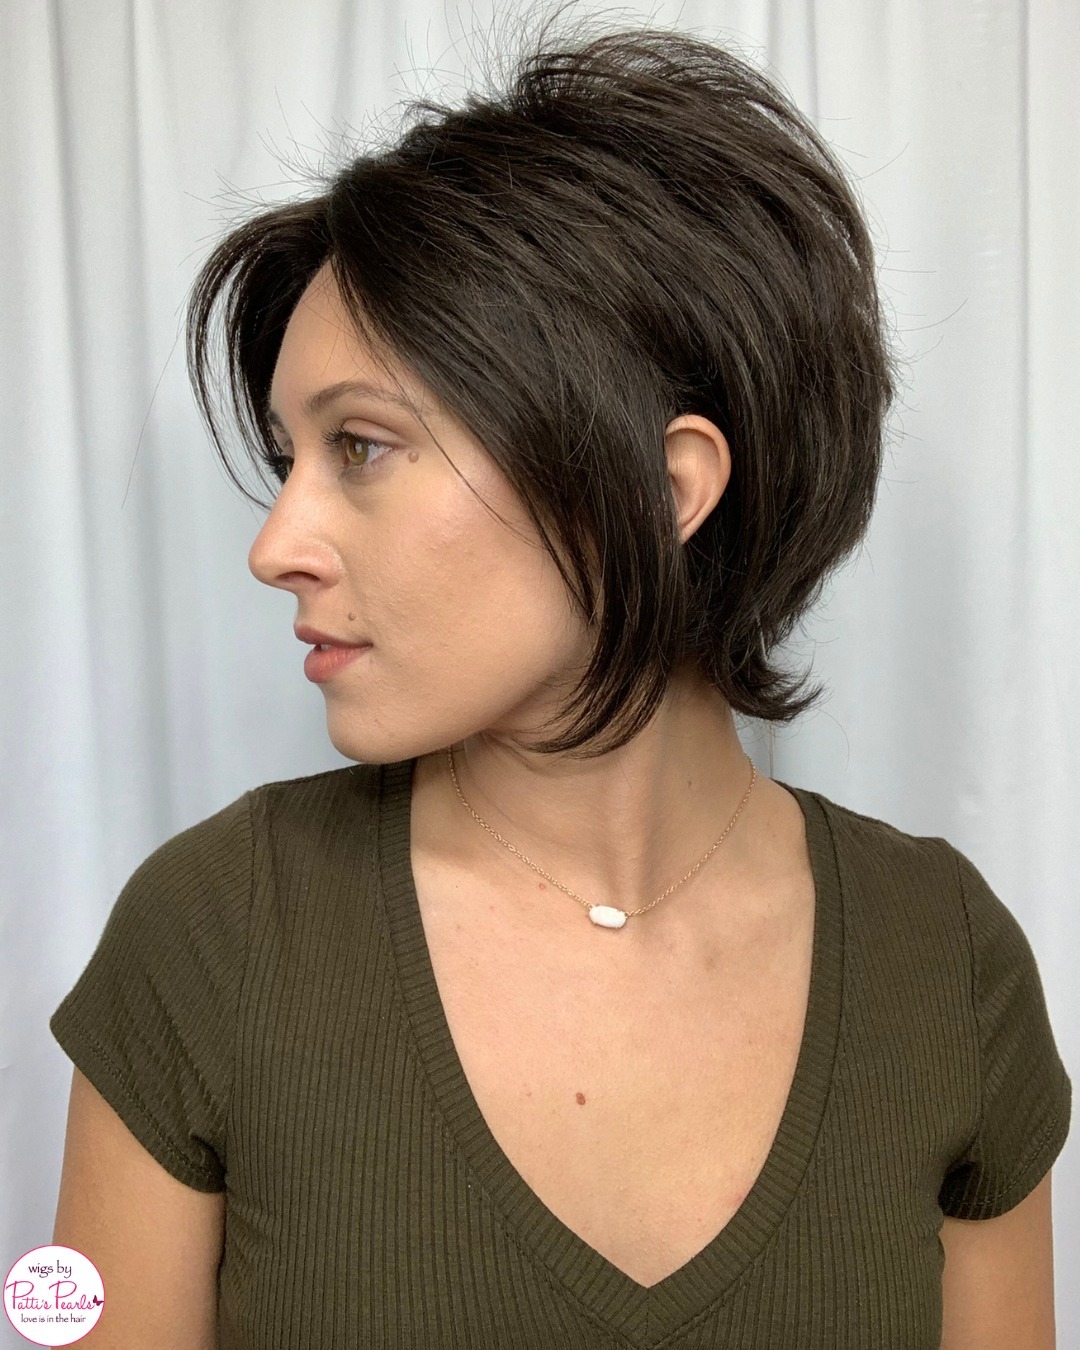 Short Hairstyles for Thin Hair 5 Easy hairstyles for short thin hair | Short haircut for thin hair to look thicker | Short hairstyles for fine hair over 70 Short Hairstyles for Thin Hair